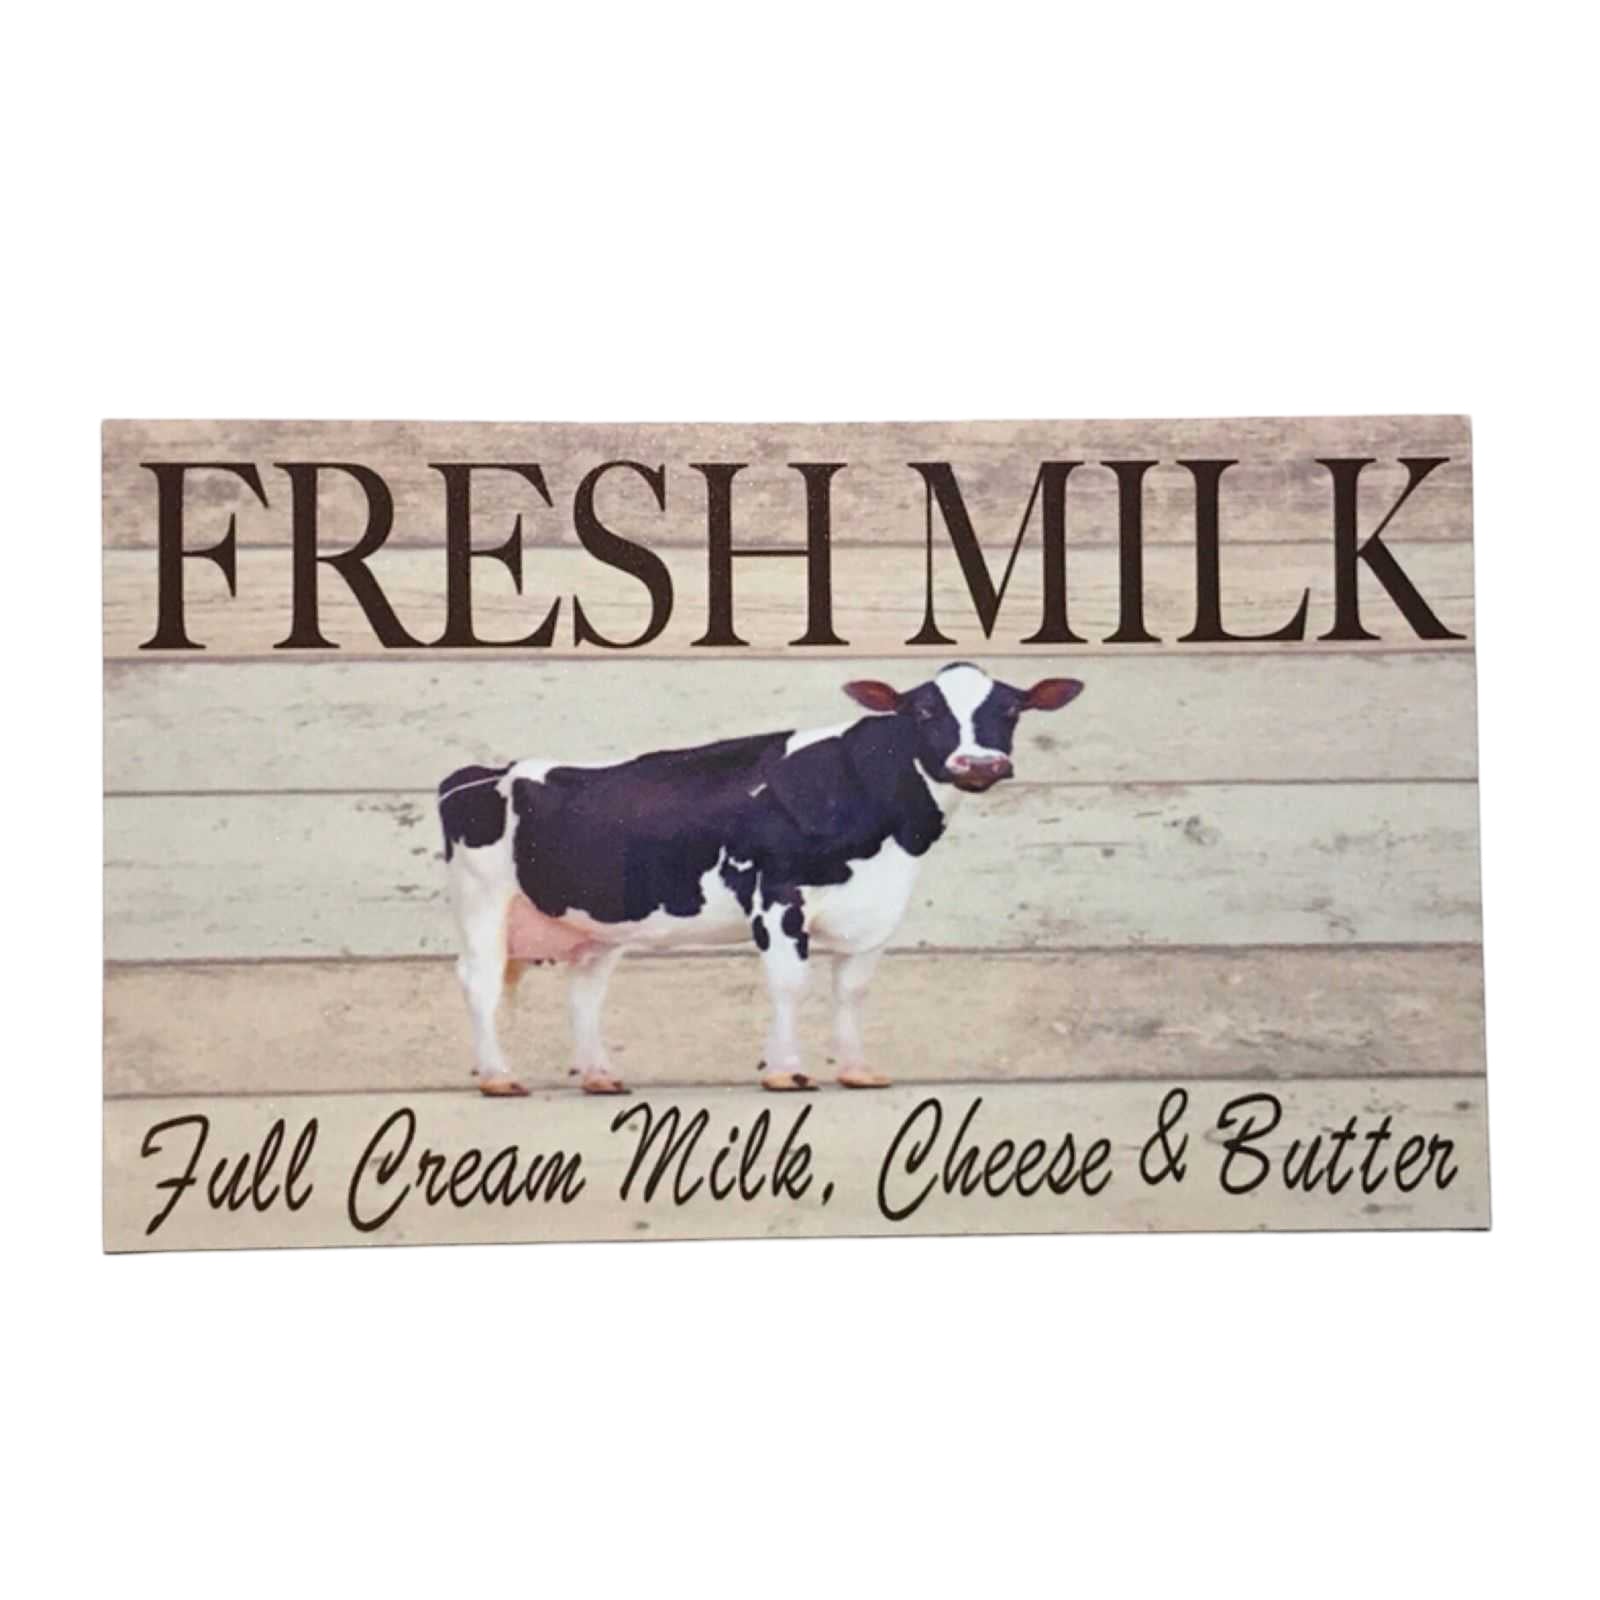 Cow Farm Milk Cream Cheese Butter Kitchen Sign - The Renmy Store Homewares & Gifts 